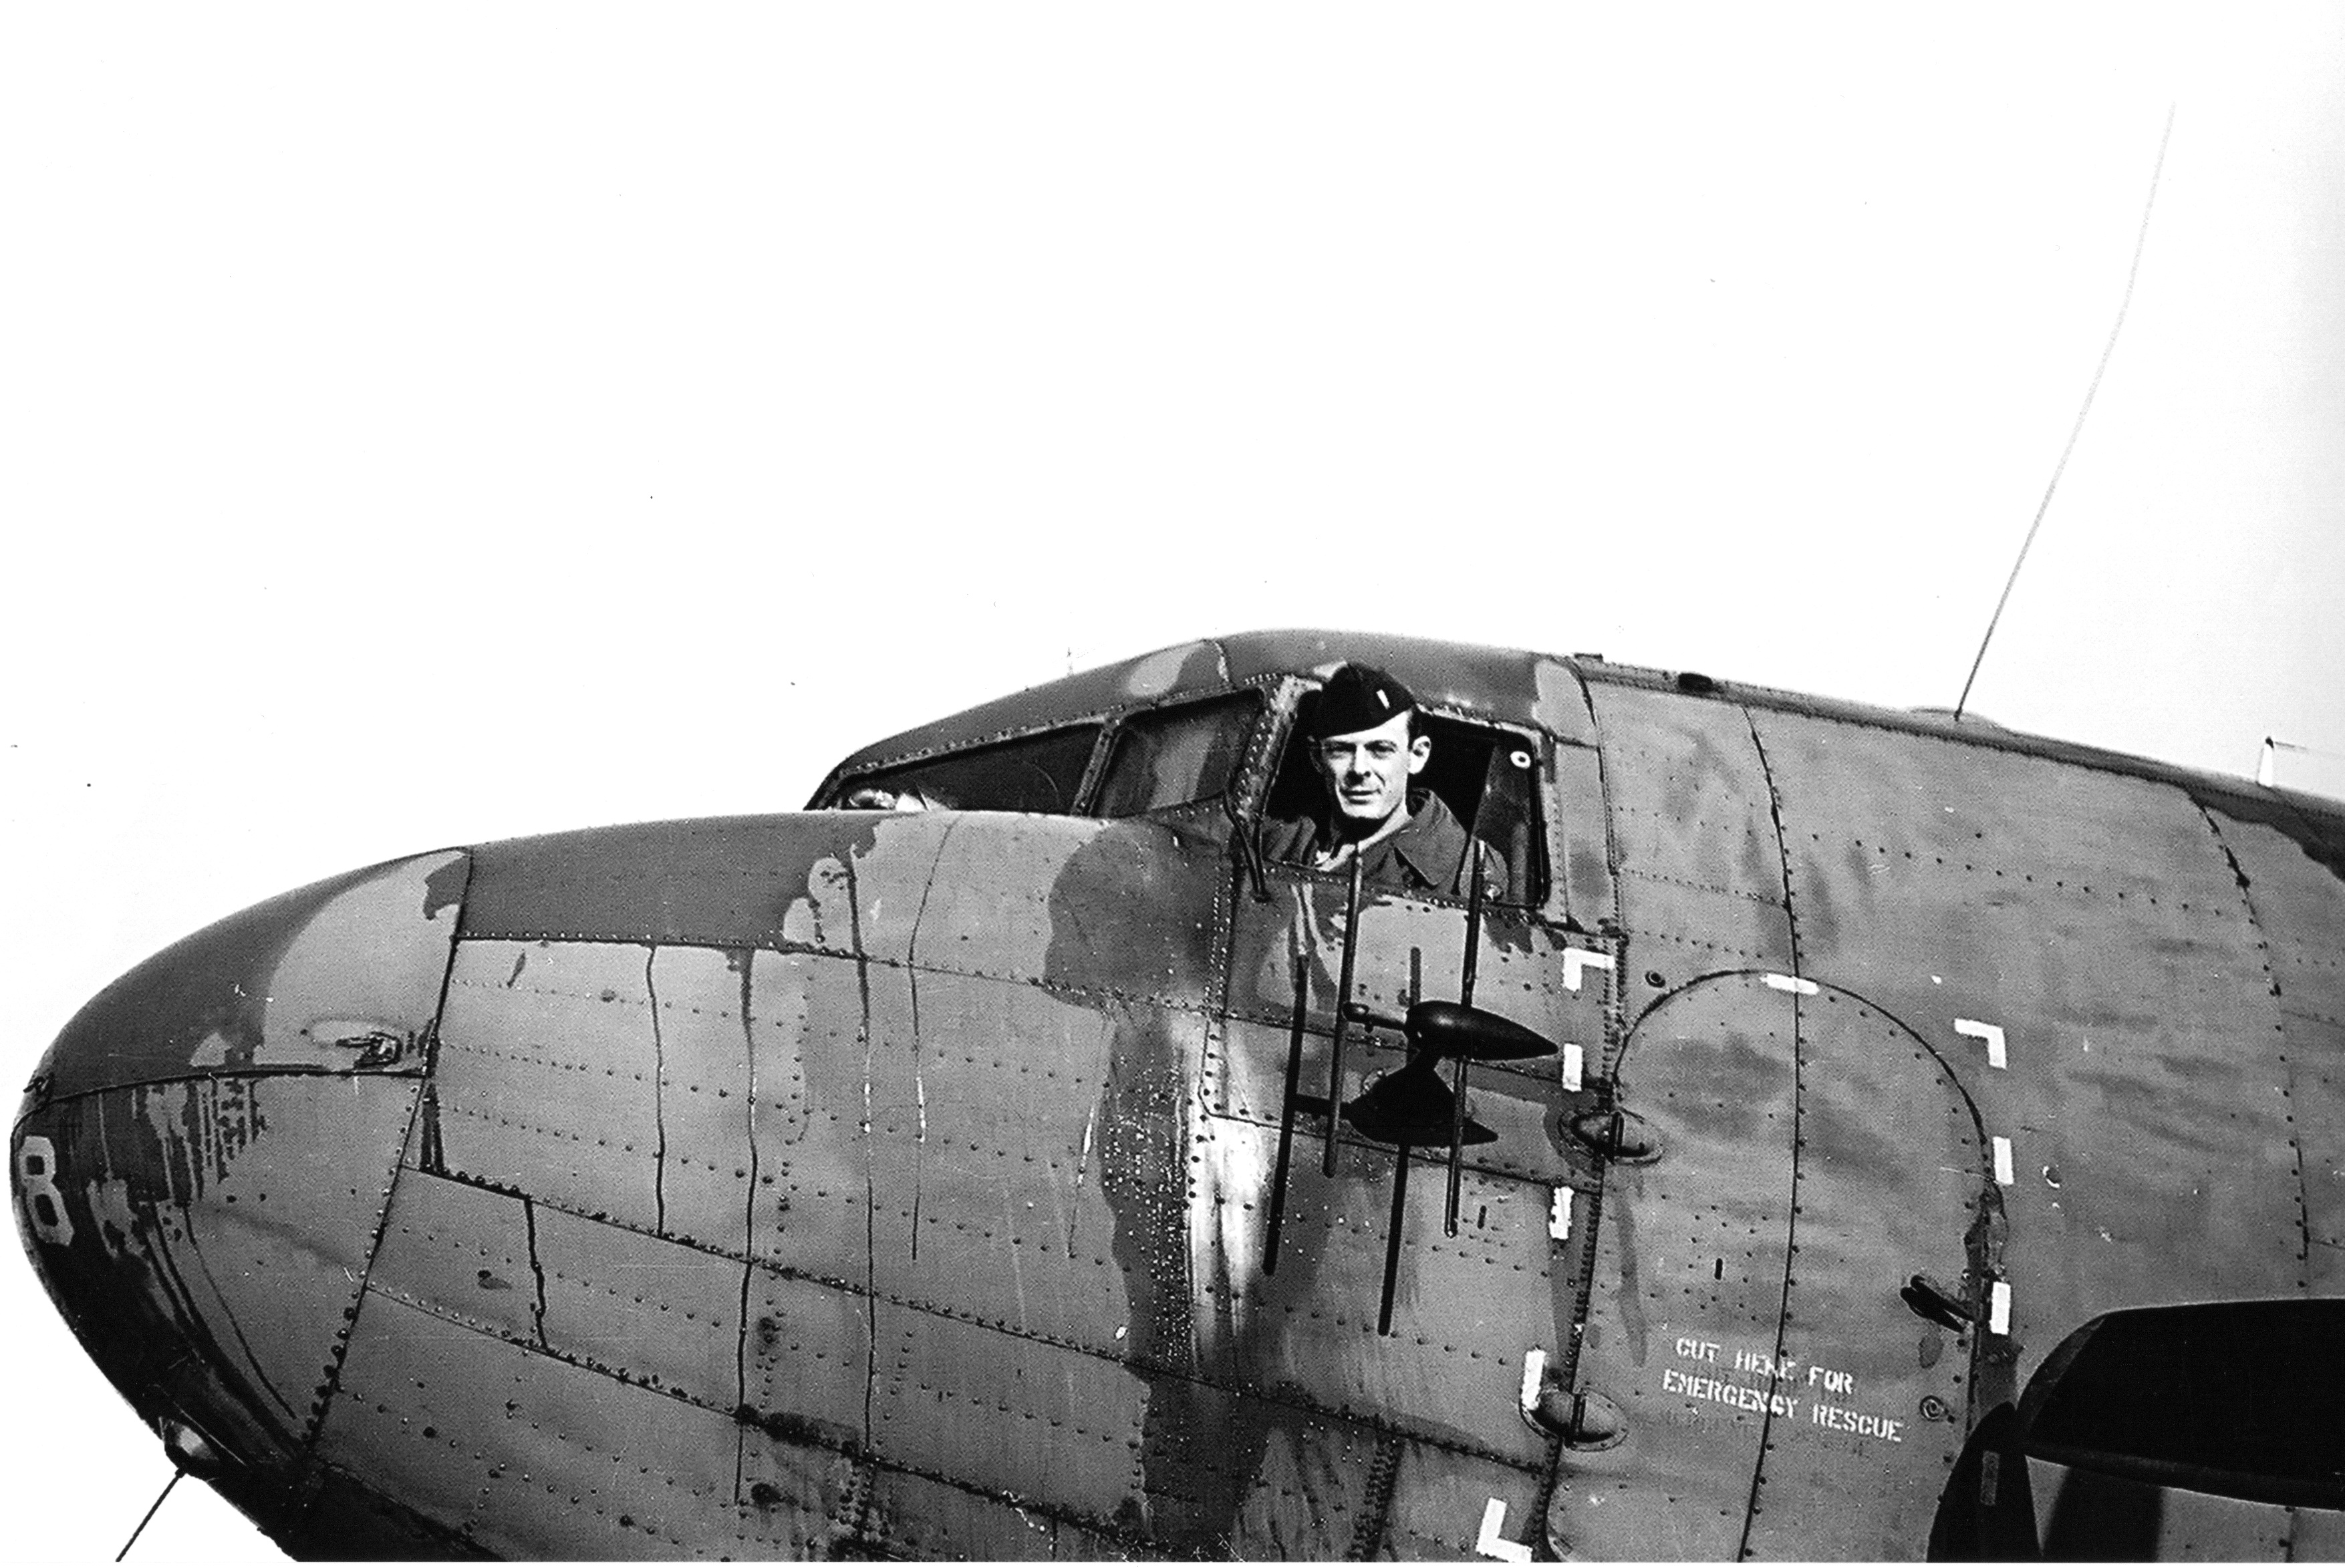 George Ethridge Jr. in the cockpit of a plane.